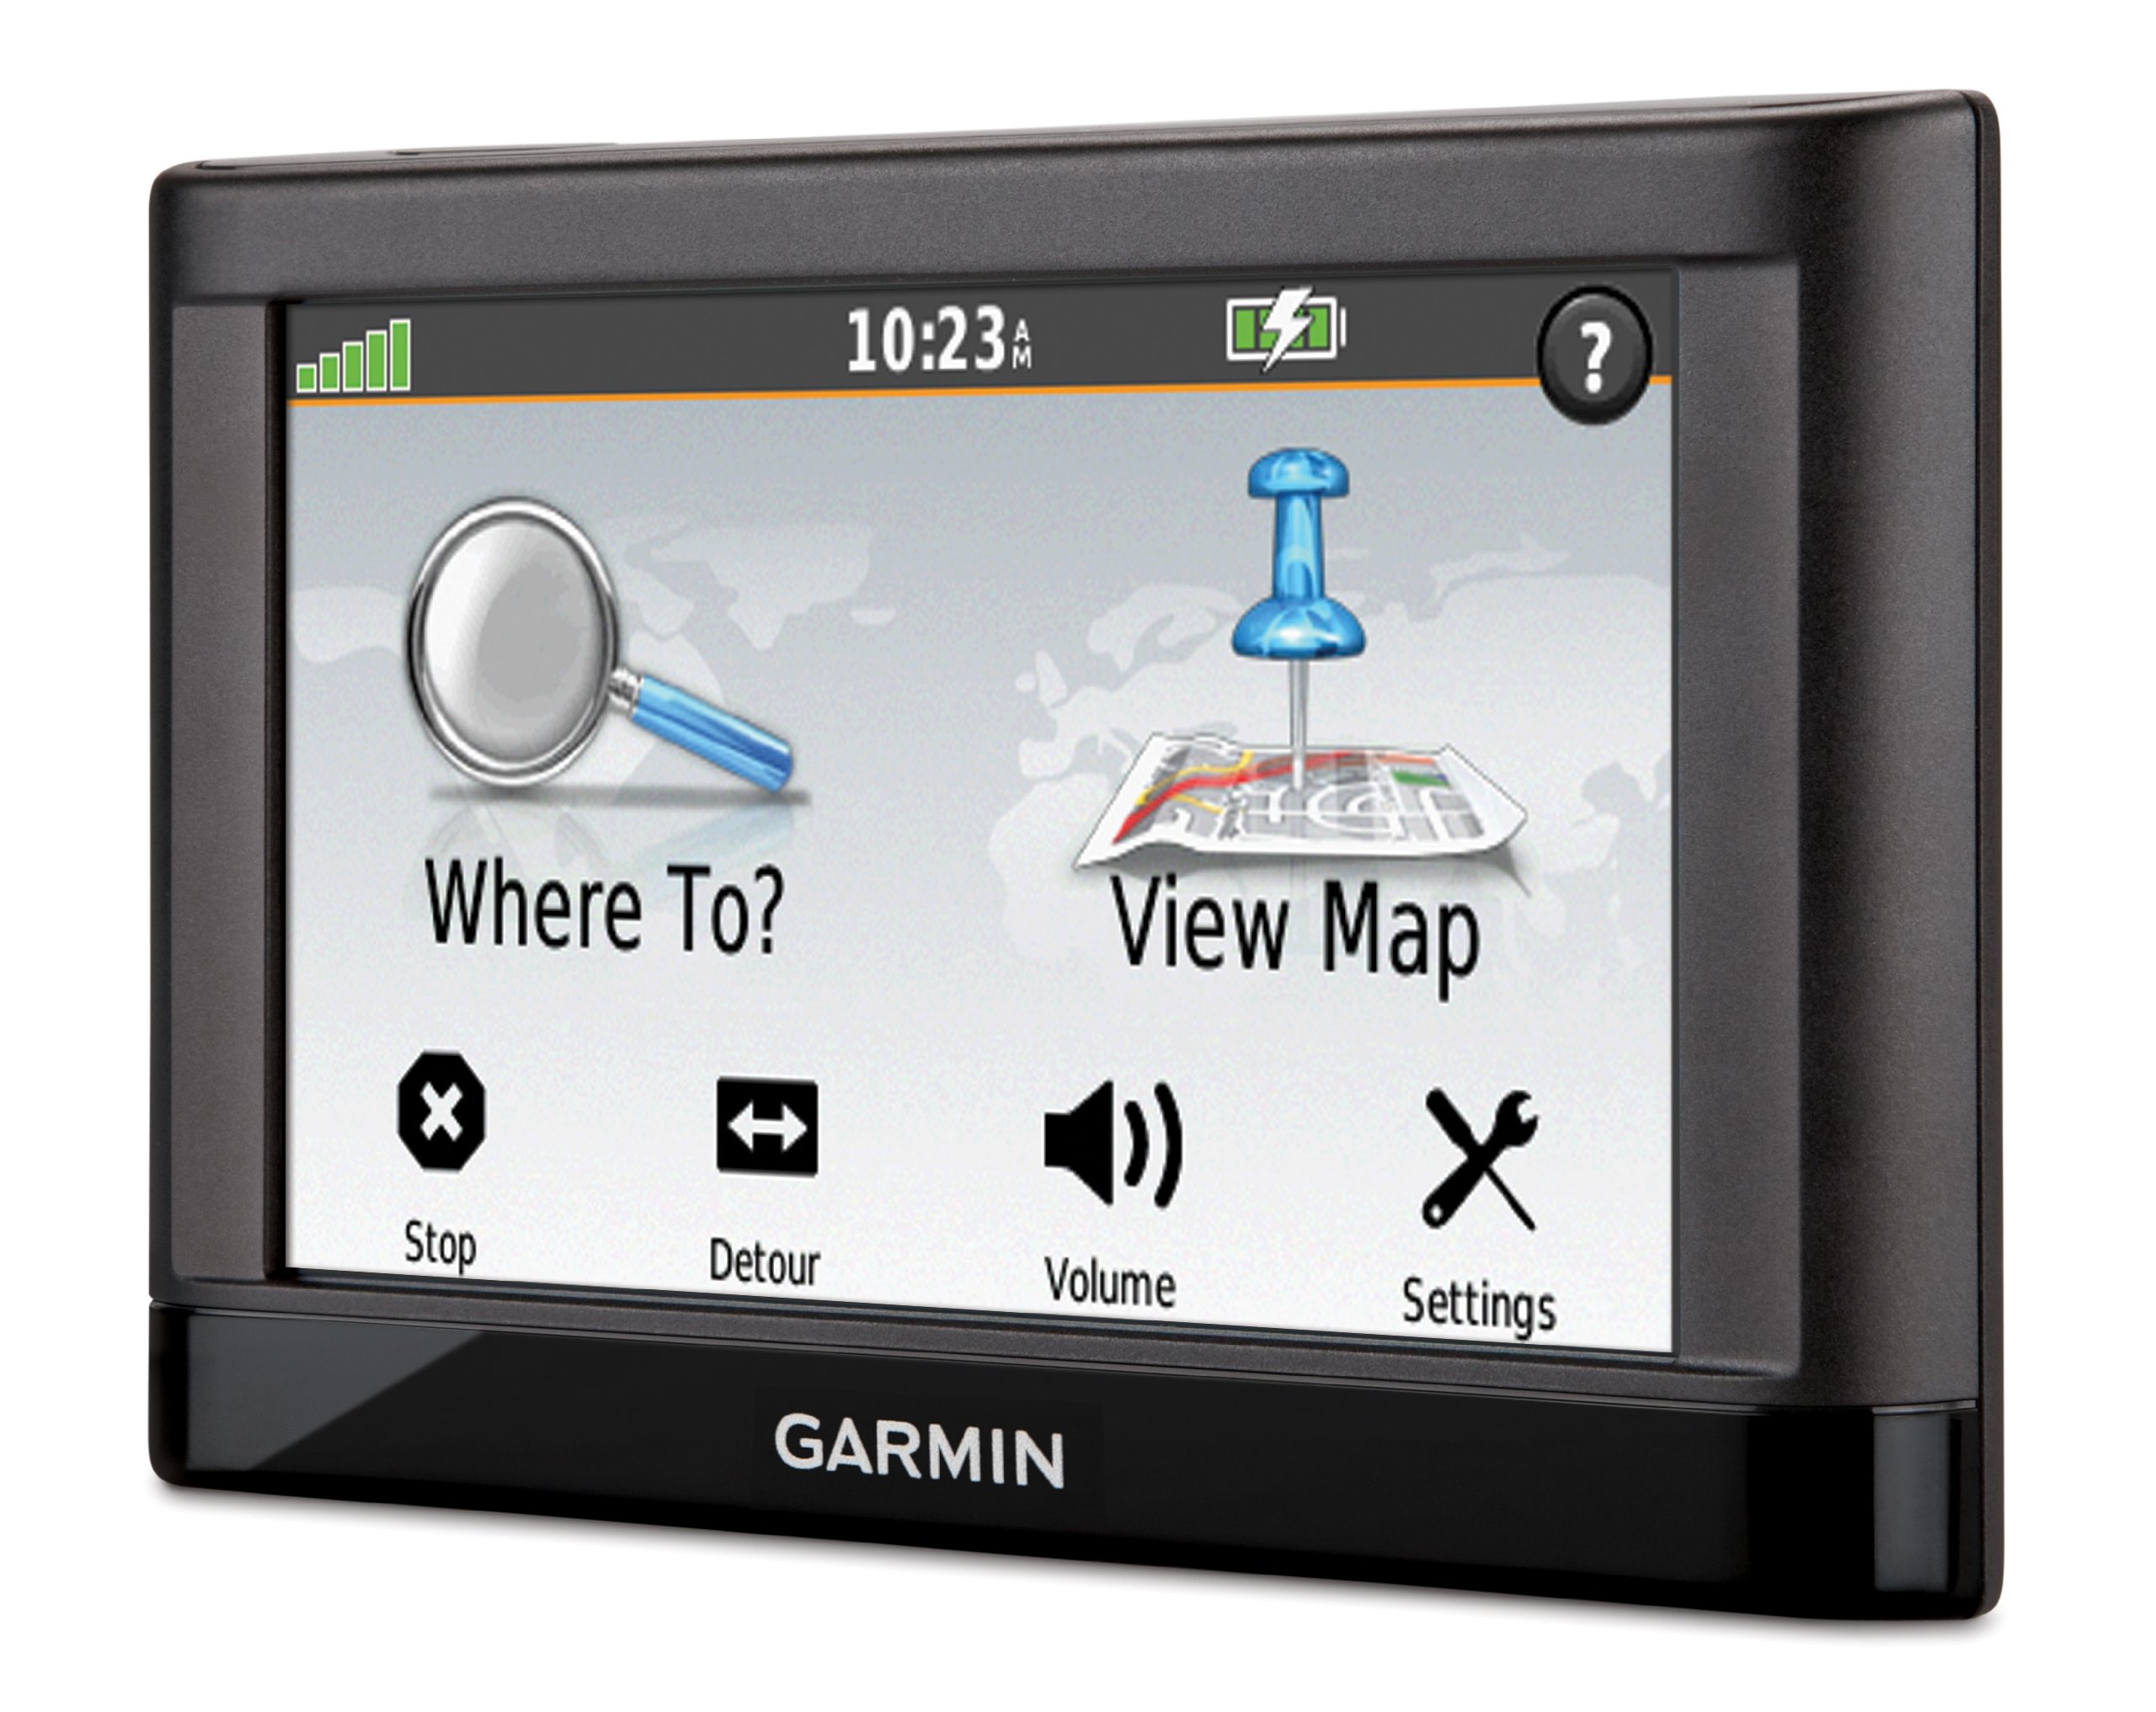 Garmin nüvi 42 4.3-Inch Portable Vehicle GPS (US) (Discontinued by Manufacturer)